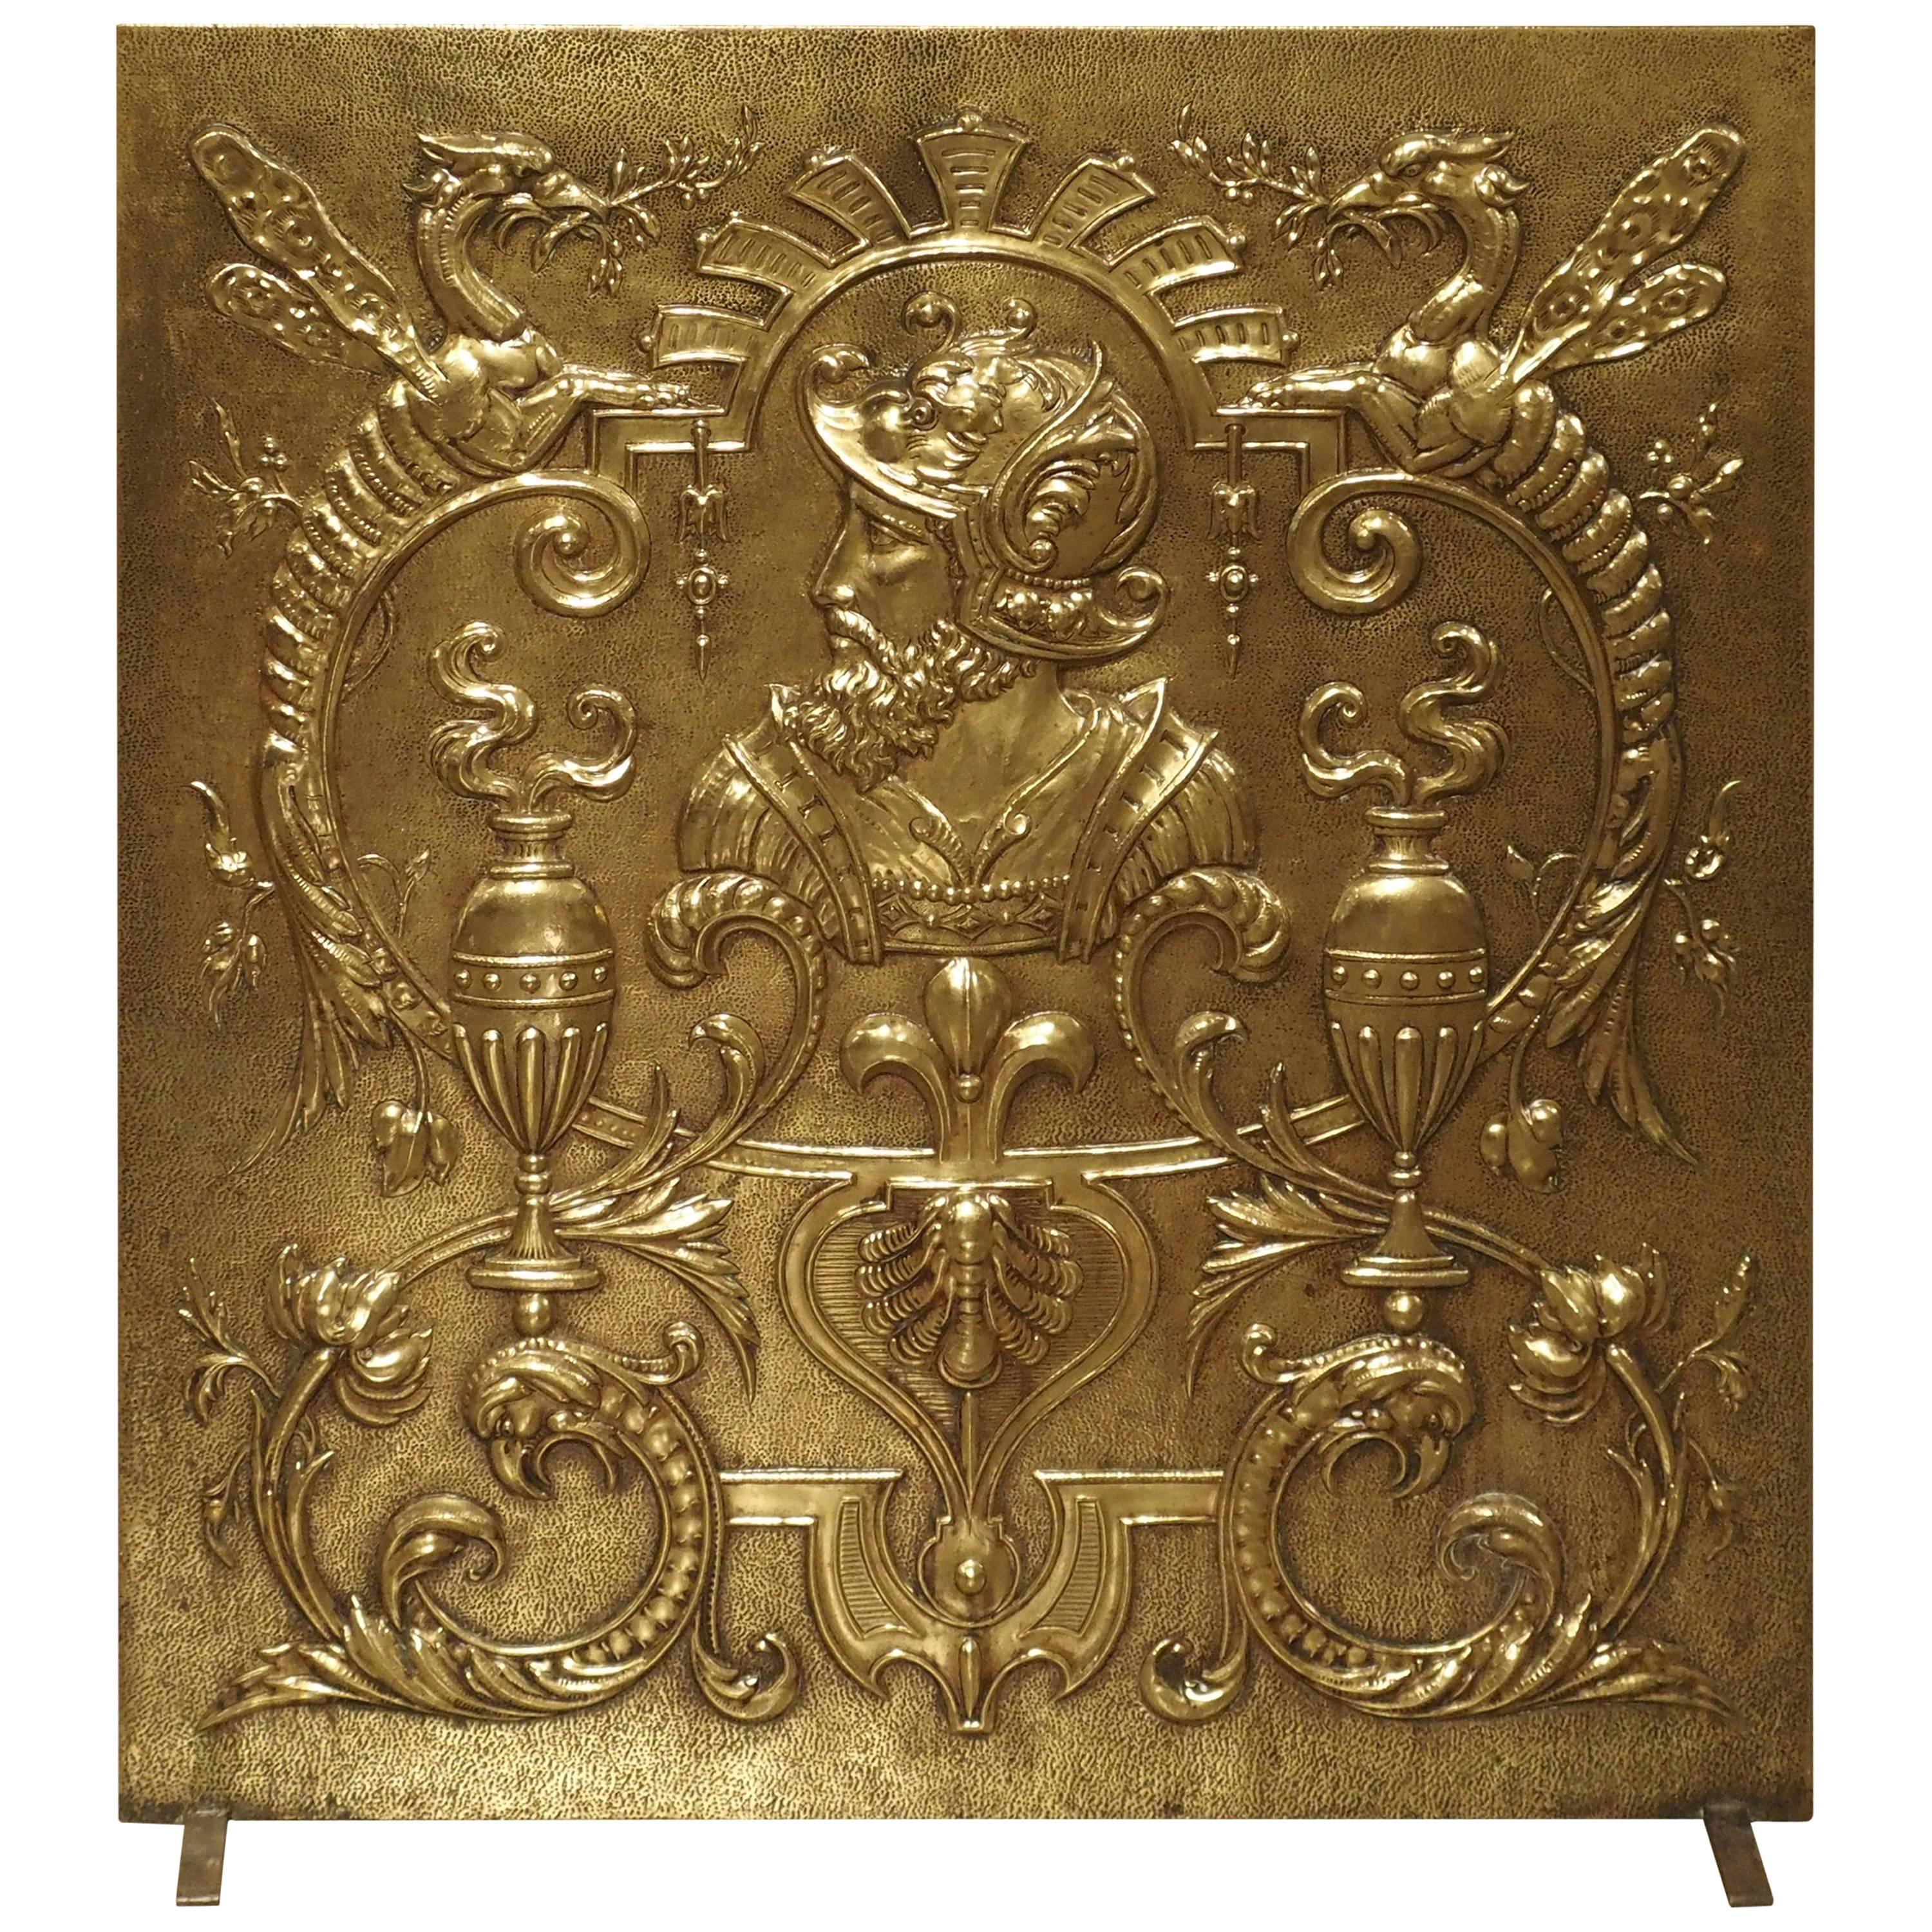 Antique Brass Fireplace Screen from France, circa 1880